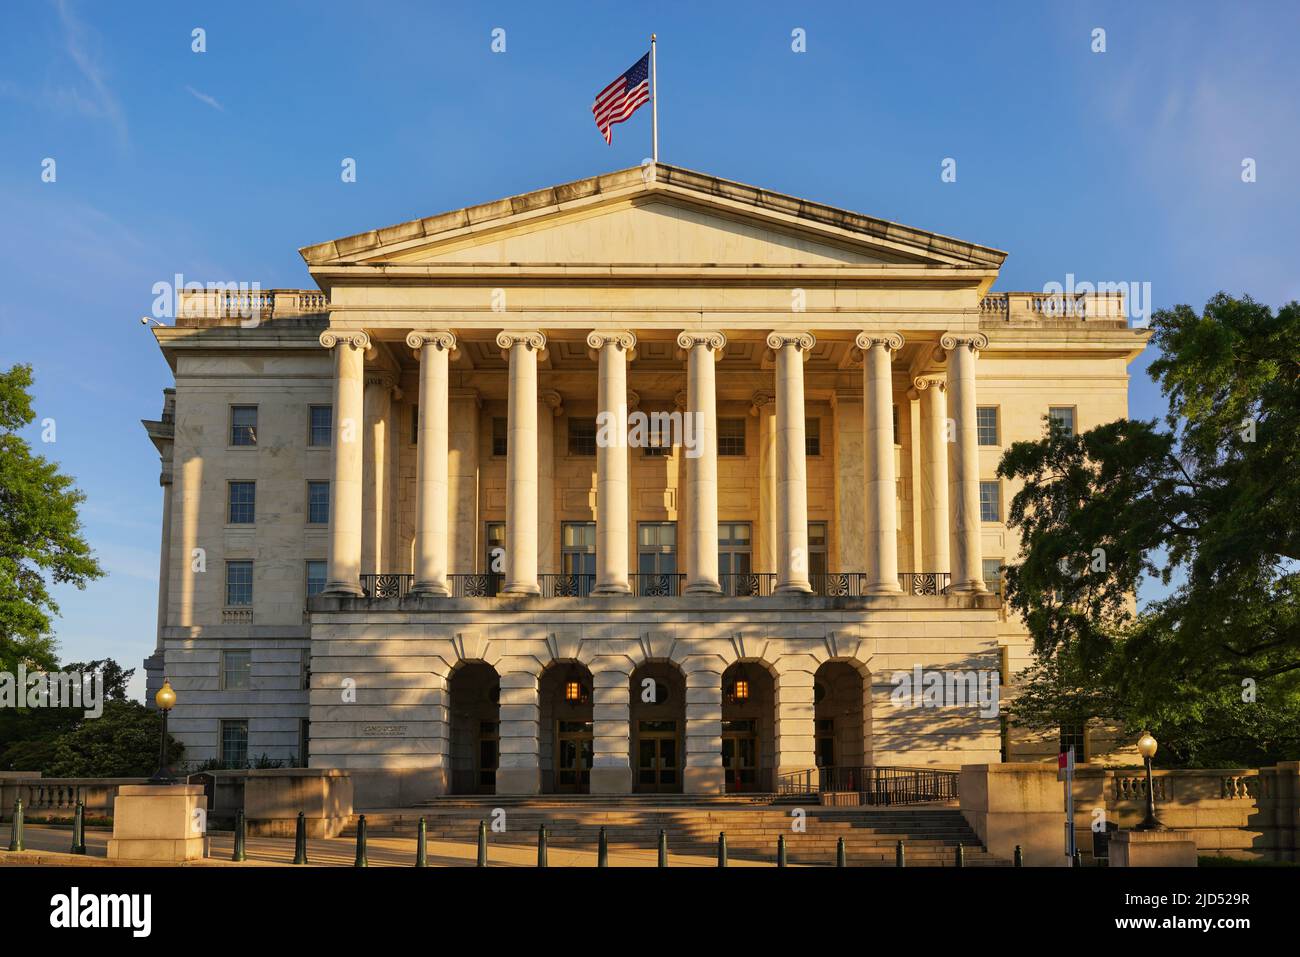 Longworth House Office Building in Washington, D.C., USA. Office building used by the United States House of Representatives. Stock Photo